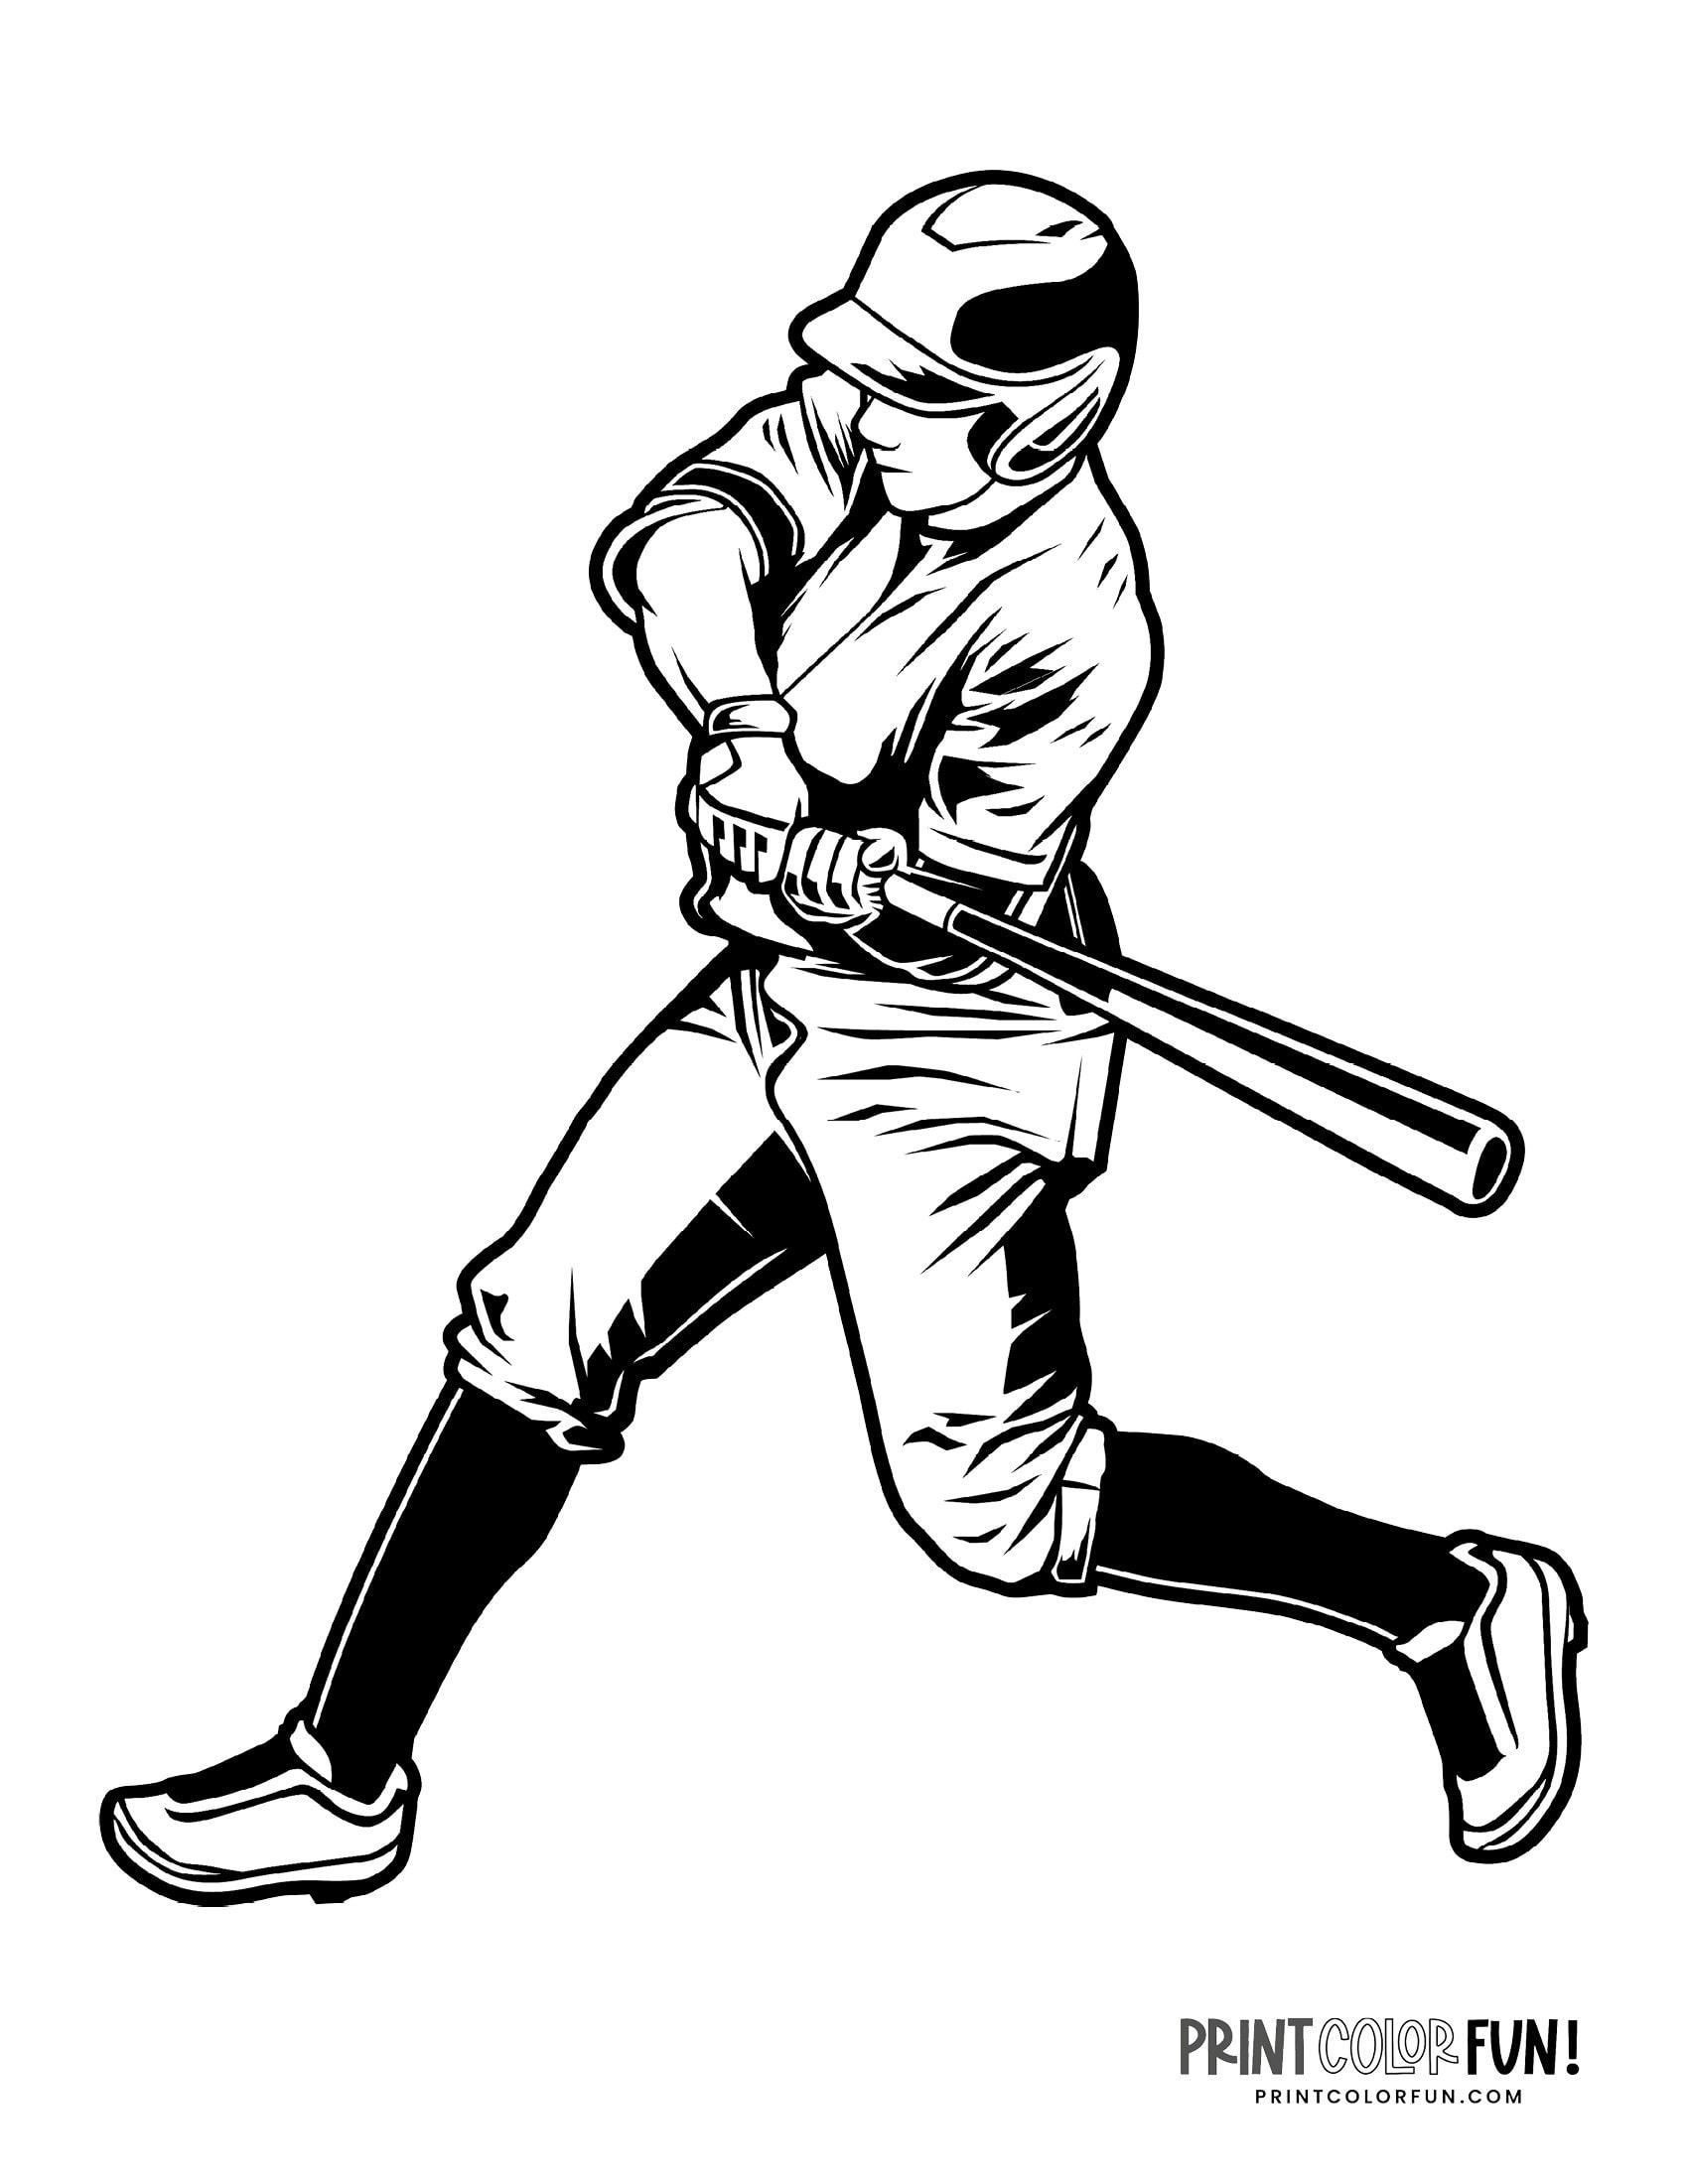 14 baseball player coloring pages Free sports printables Print Color